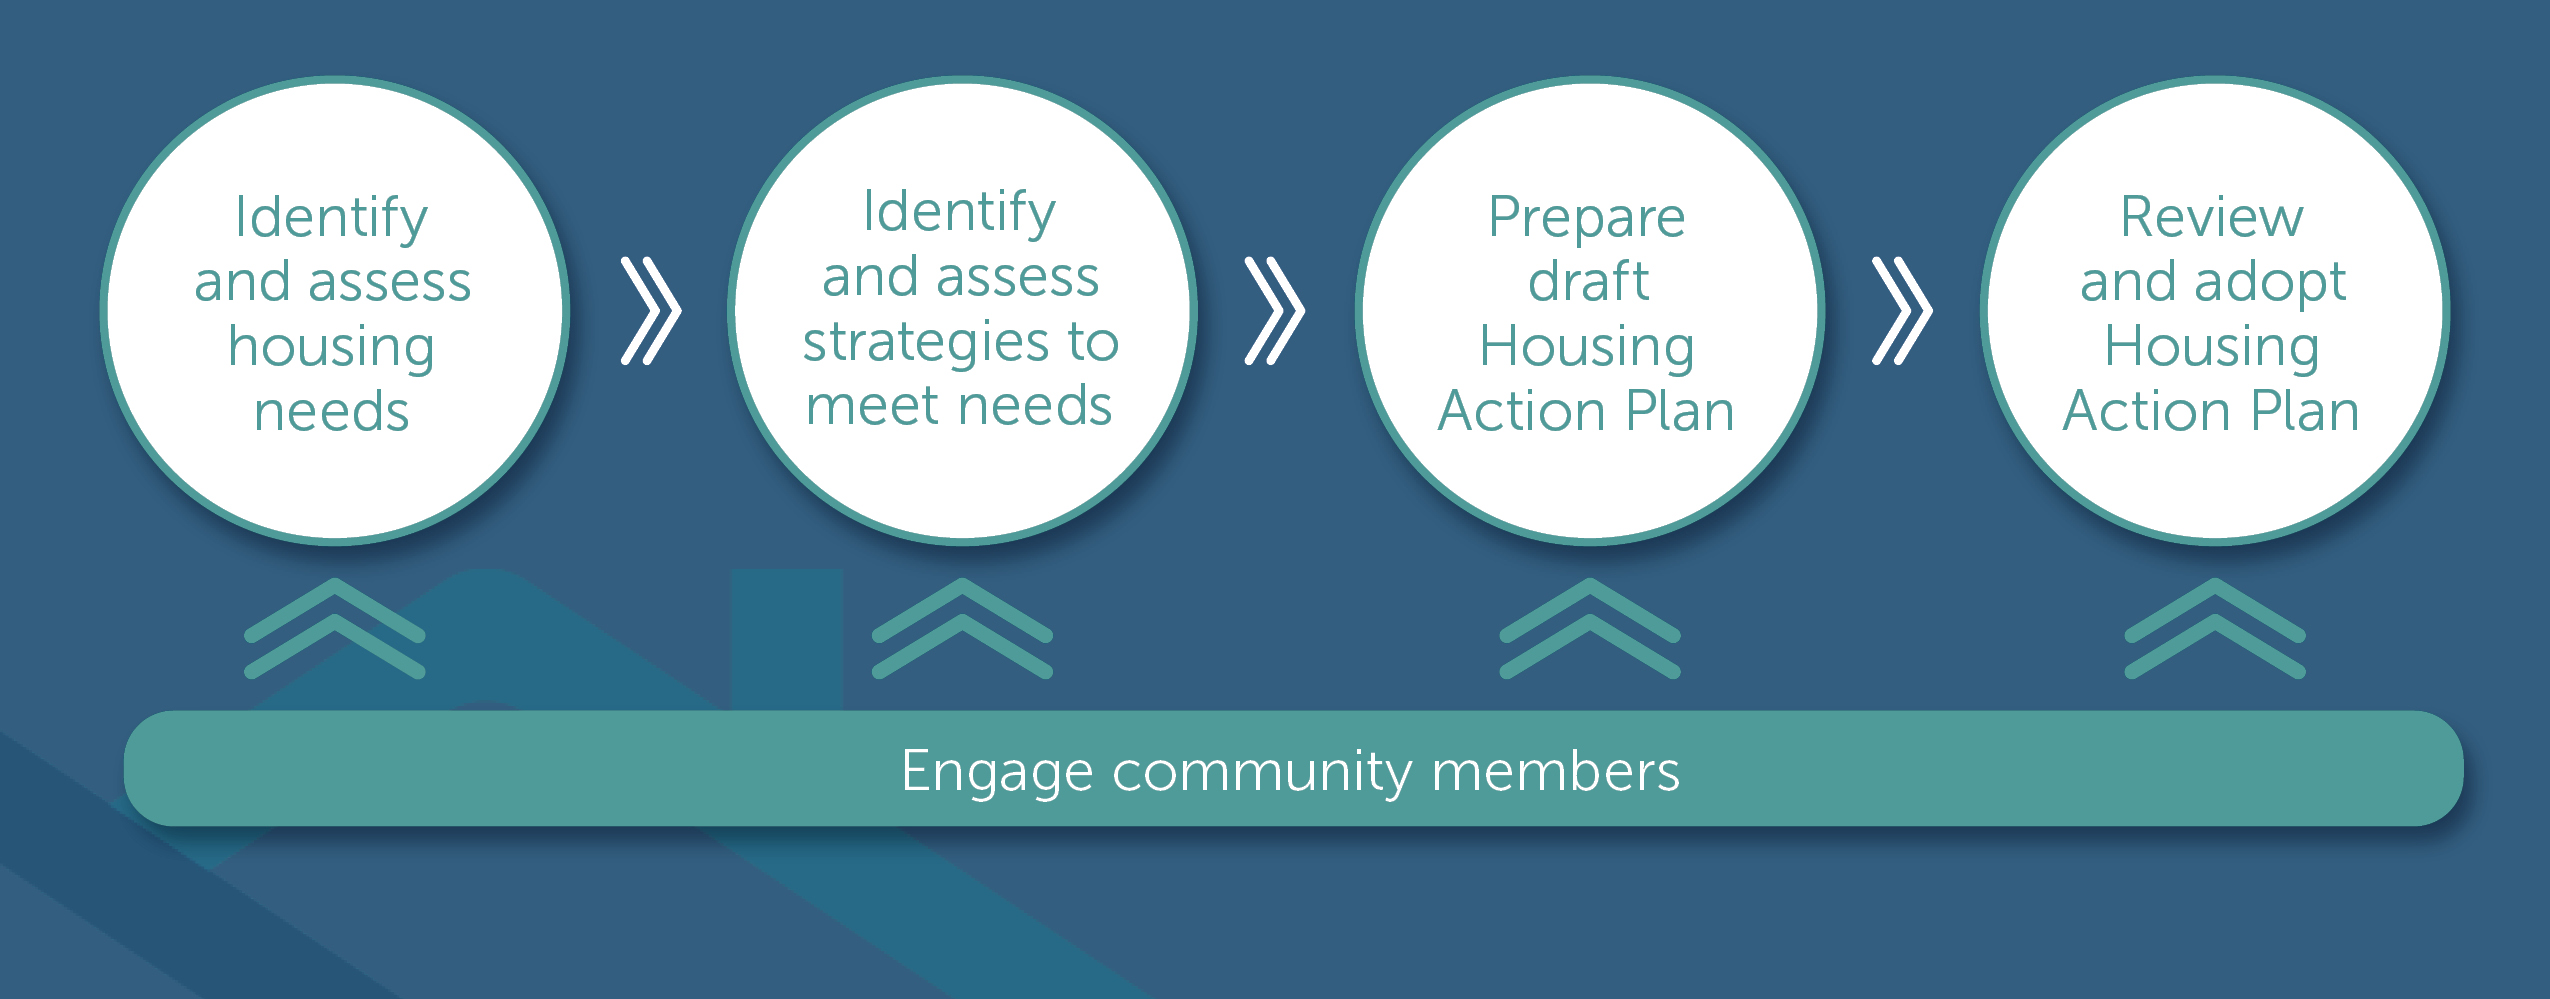 Mukilteo Housing Action Plan Process: Engage community members to identify and assess housing needs, identify and assess strategies to meet needs, prepare a draft Housing Action Plan, and Review and adopt a Housing Action Plan.